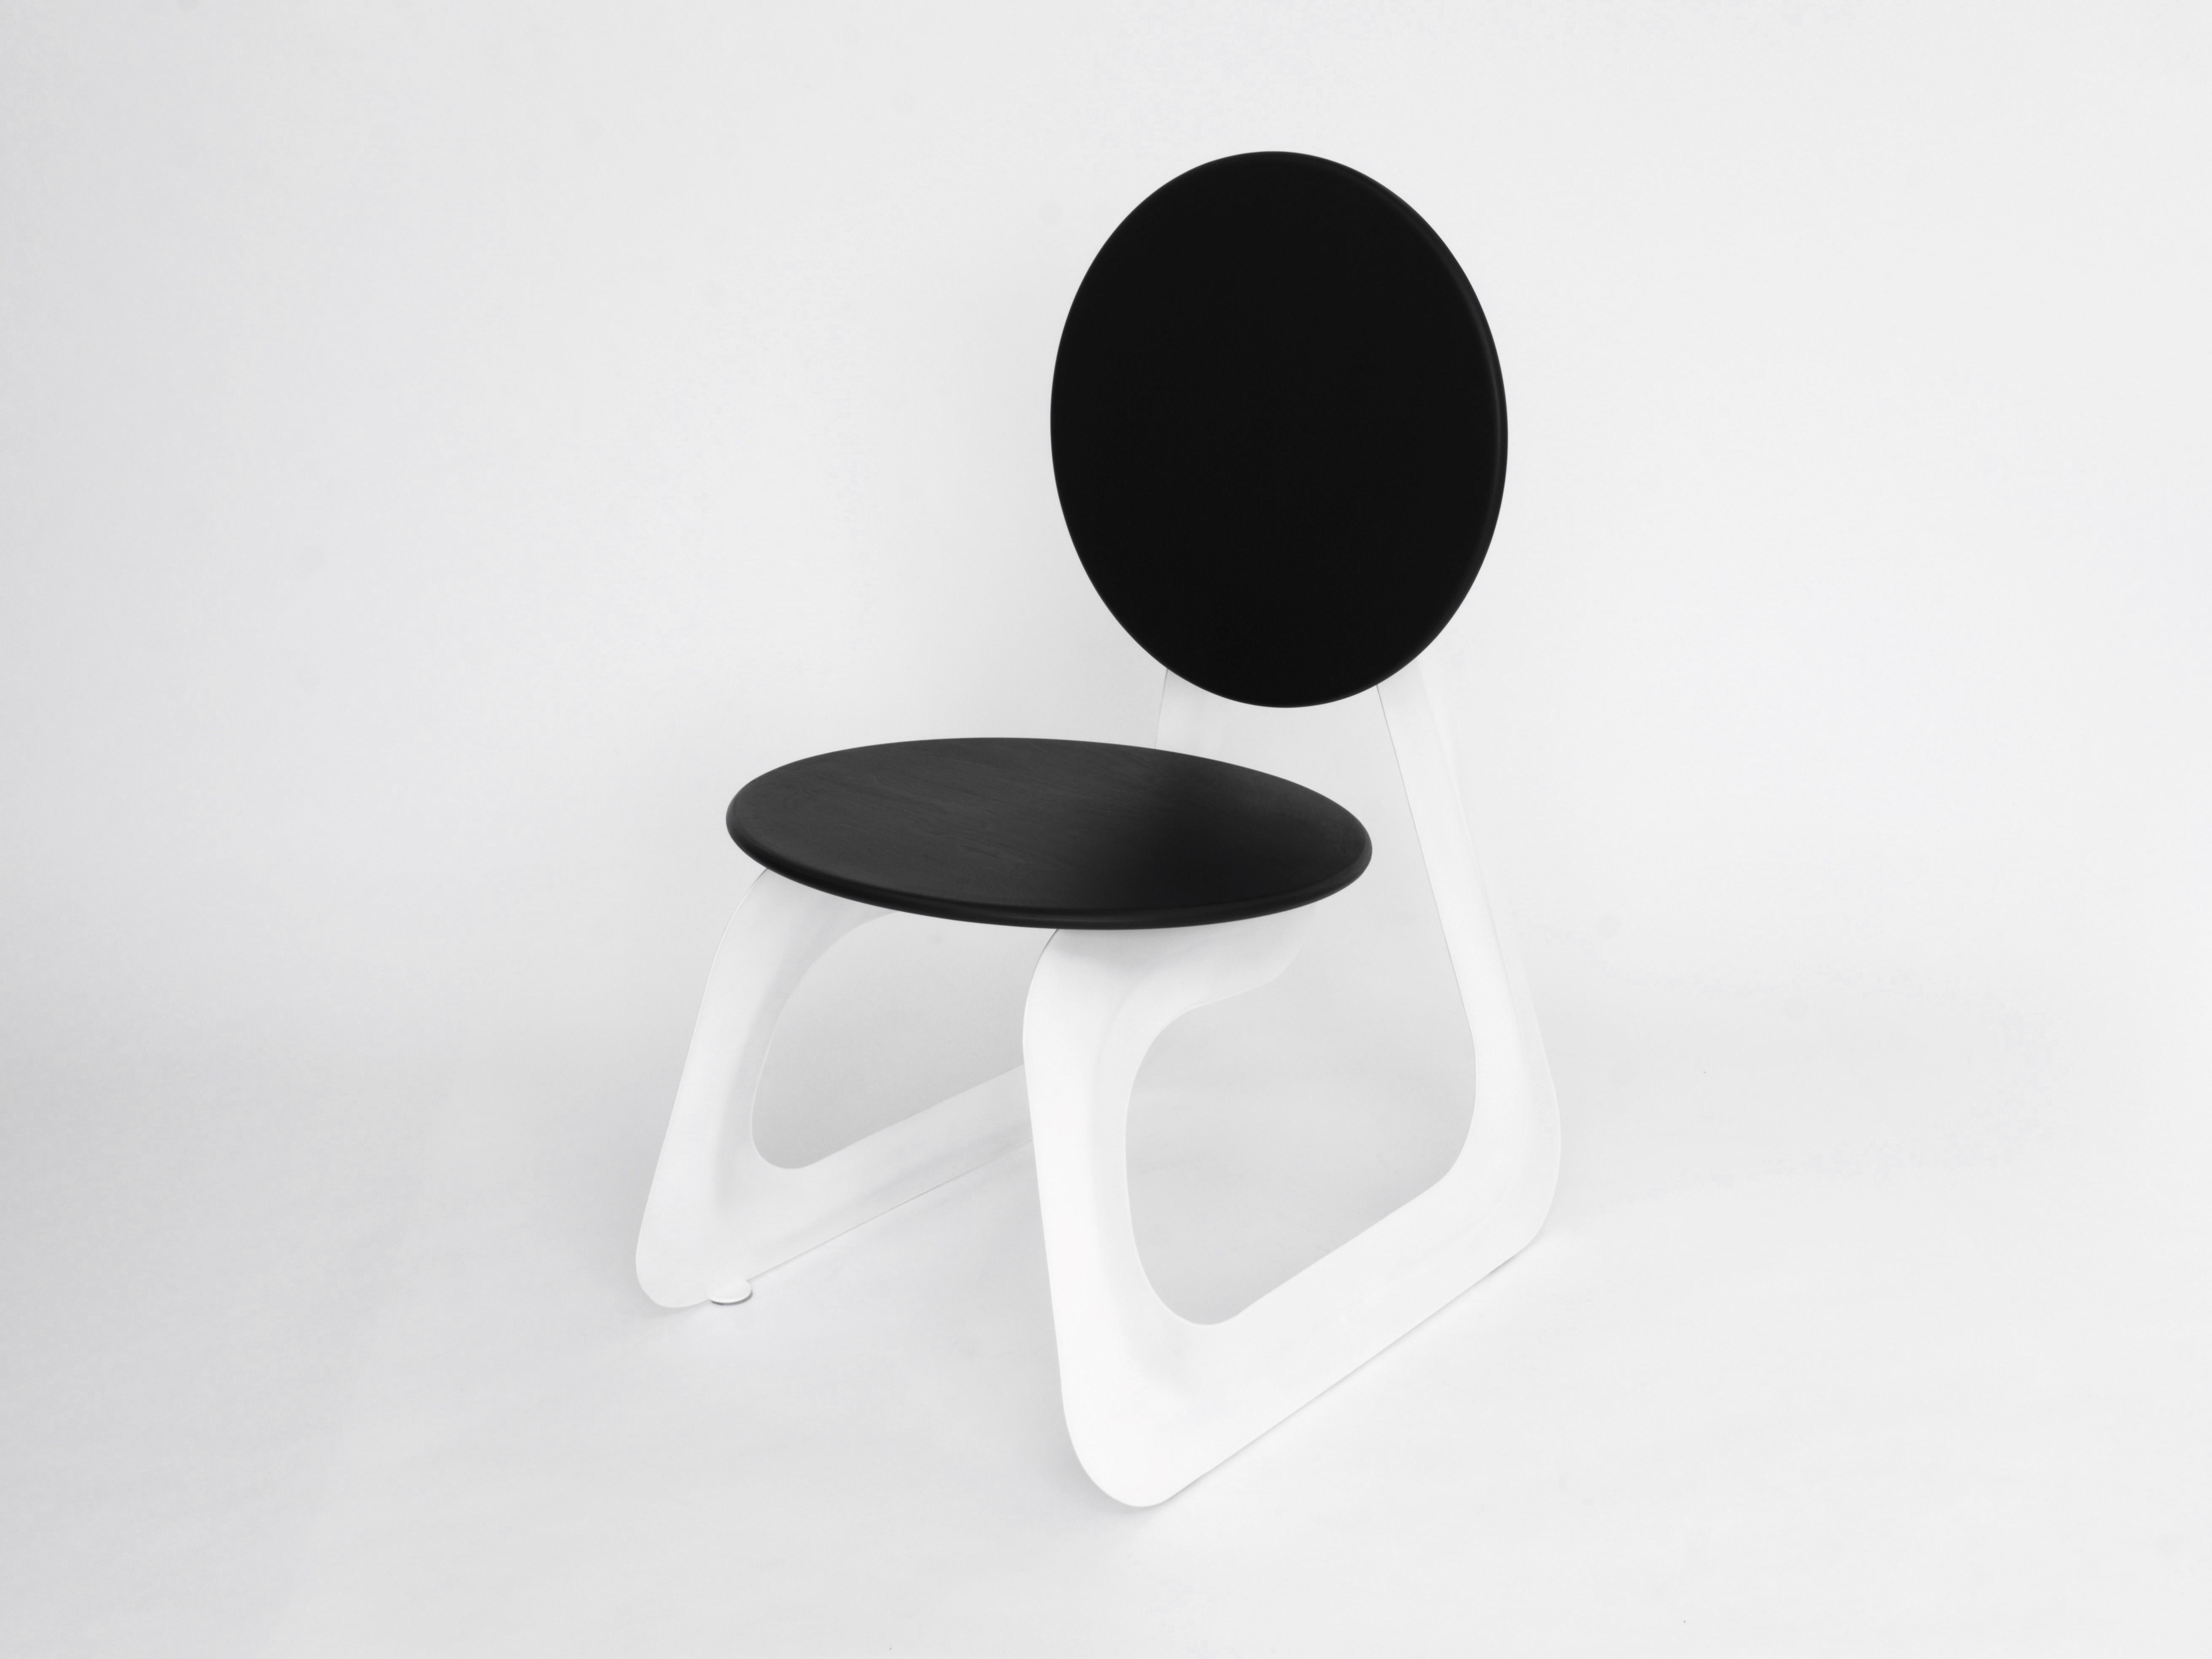 The Aeroformed Chair is a futuristic design that showcases the innovative manufacturing process of ‘Aeroforming’, where air is injected into a sealed envelope of sheet metal, inflating it like a balloon.

Inflating metal enables the creation of